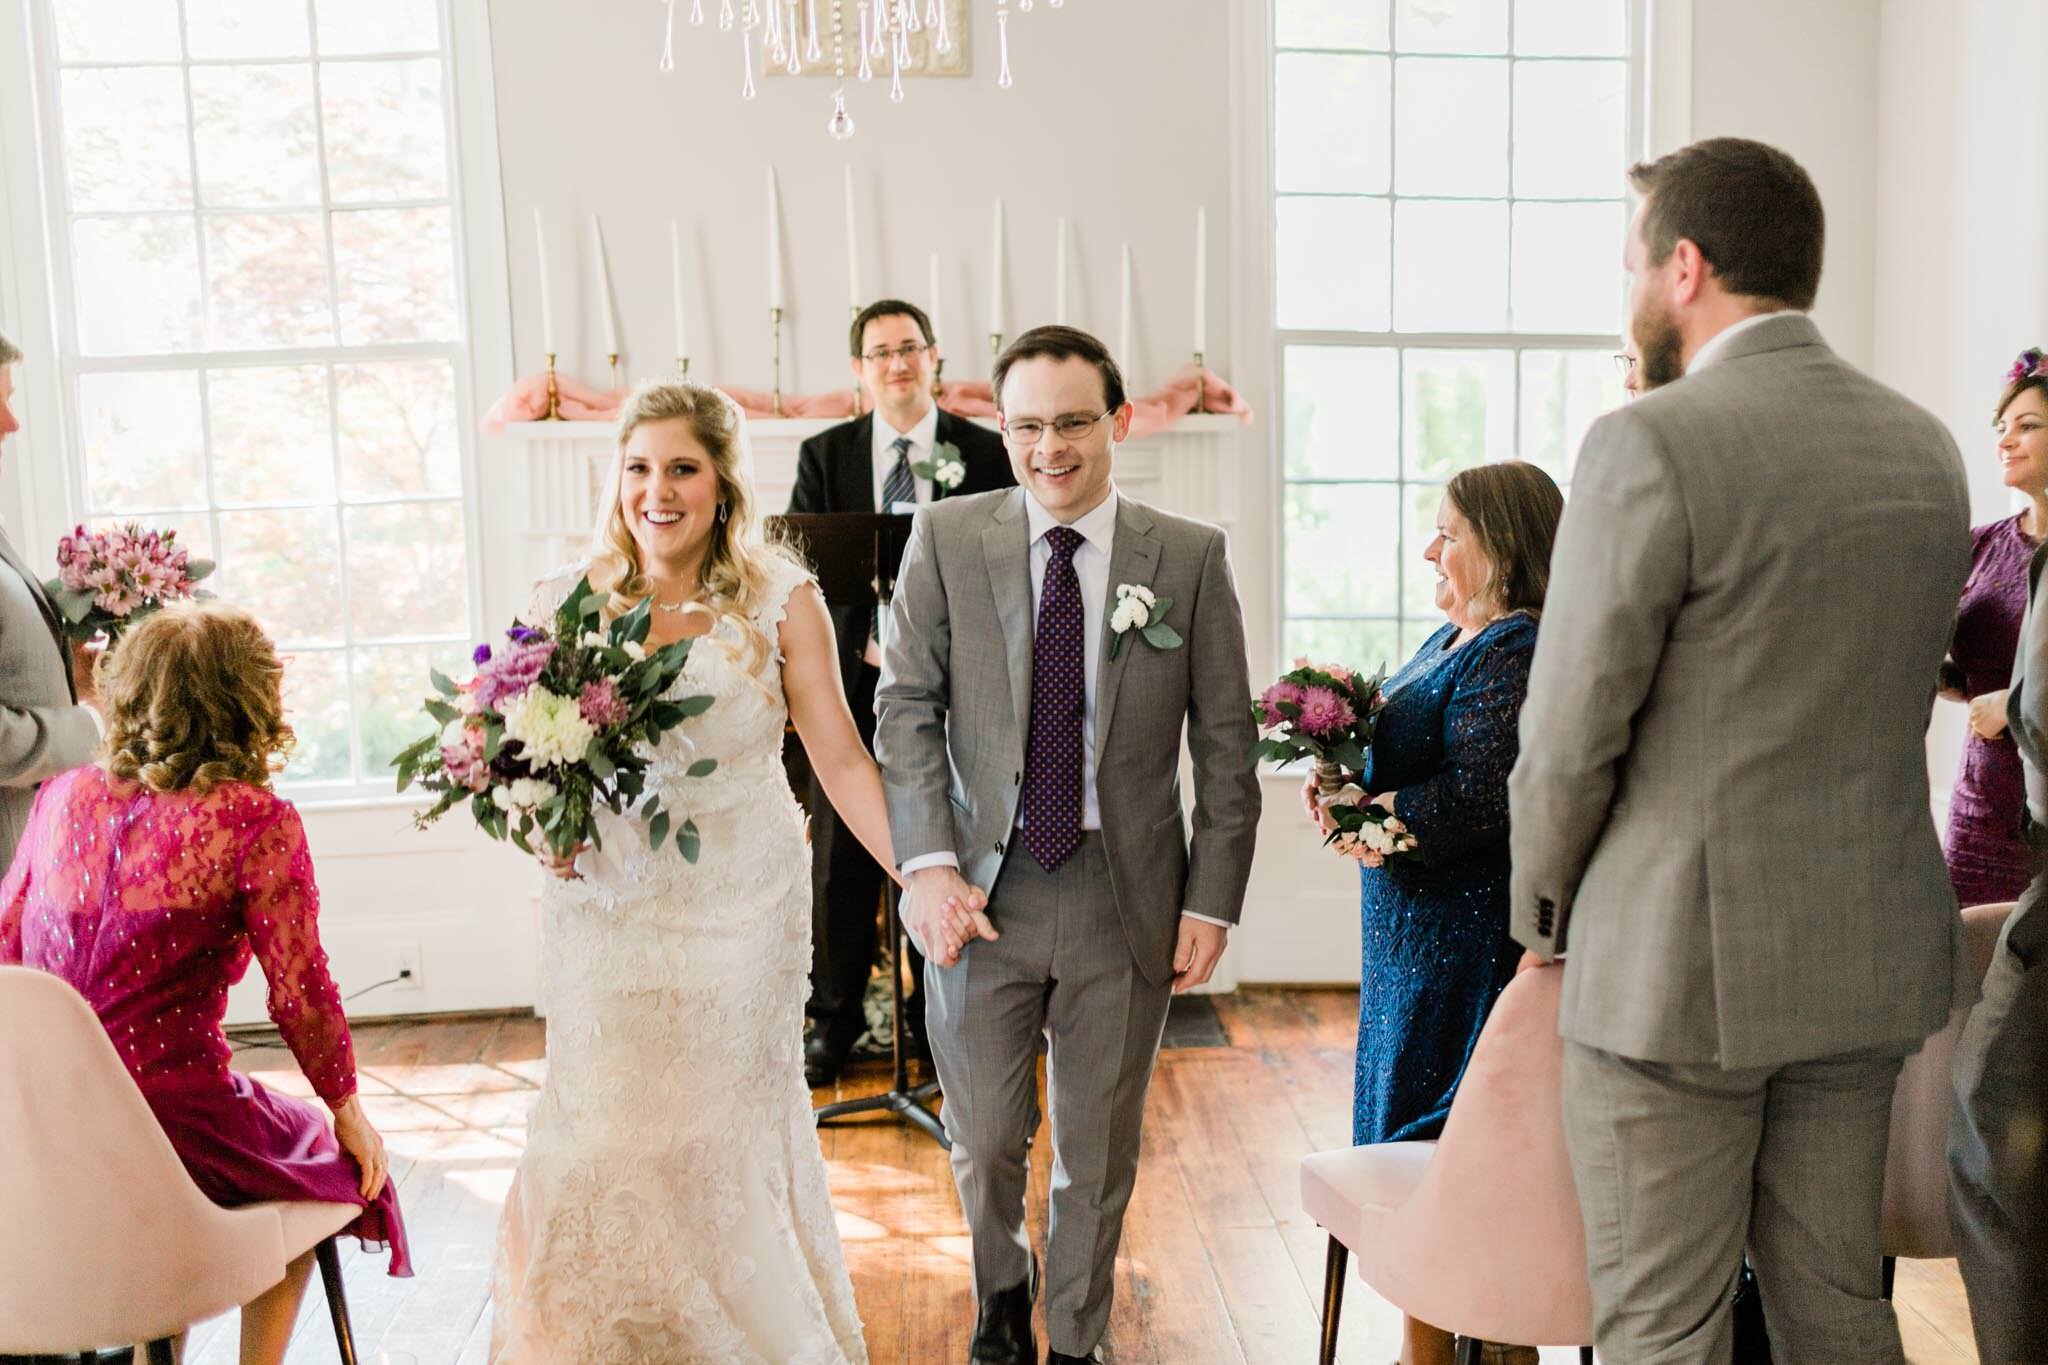 Durham Wedding Photographer | By G. Lin Photography | Presentation of the bride and groom